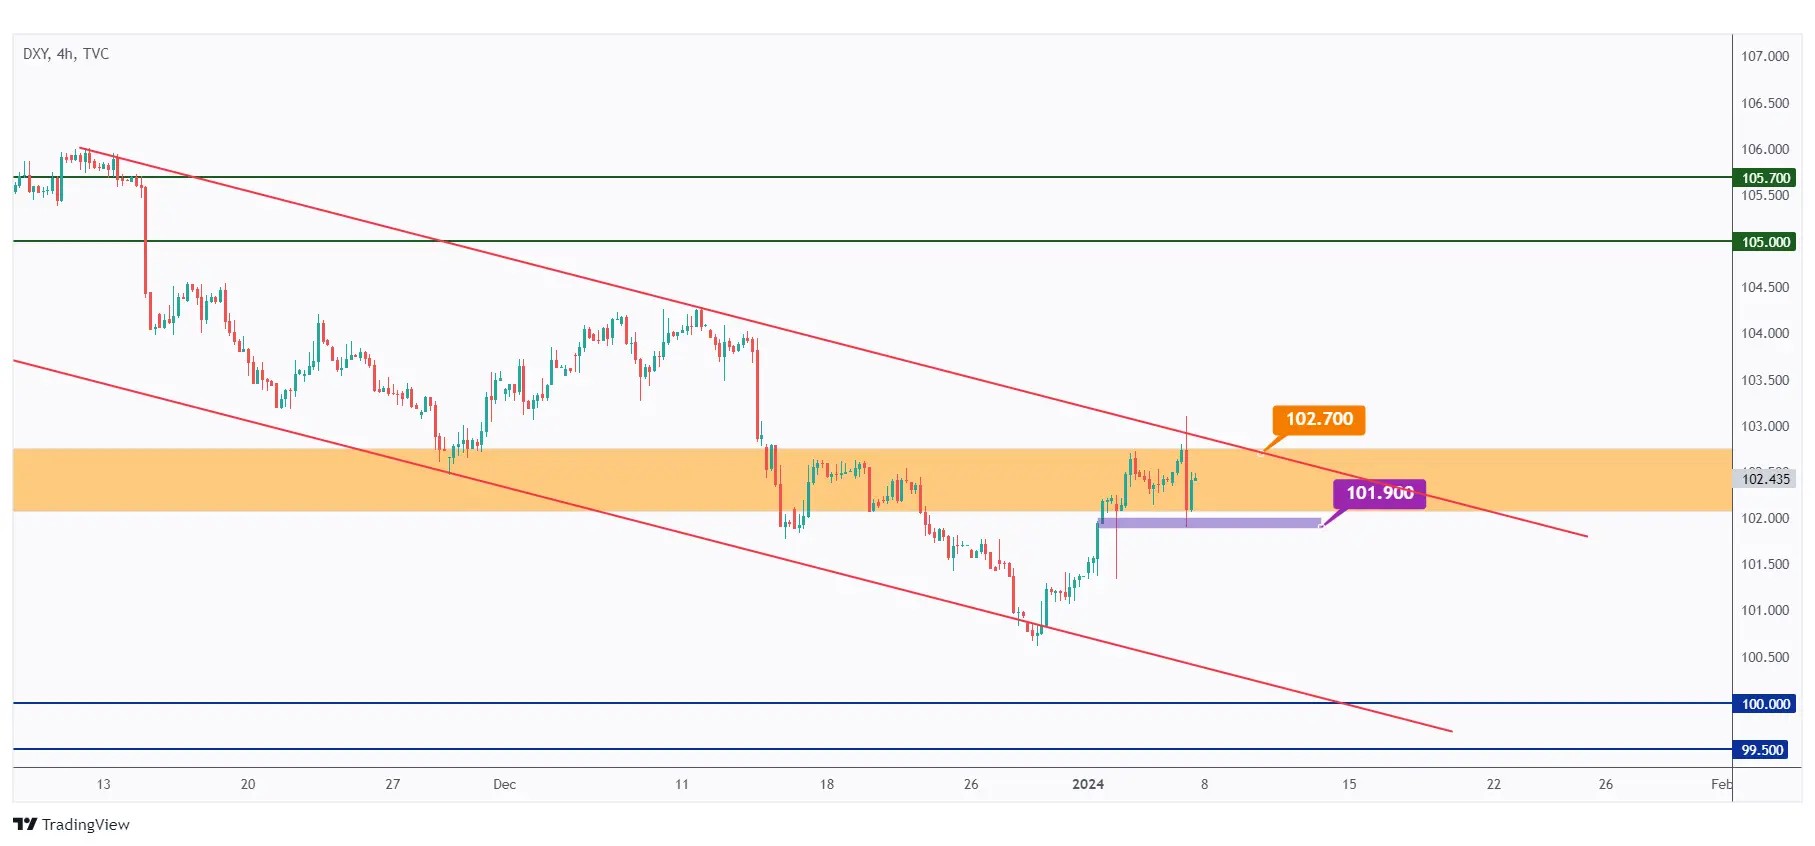 dxy 4h chart showing the overall bearish trend inside a falling channel.